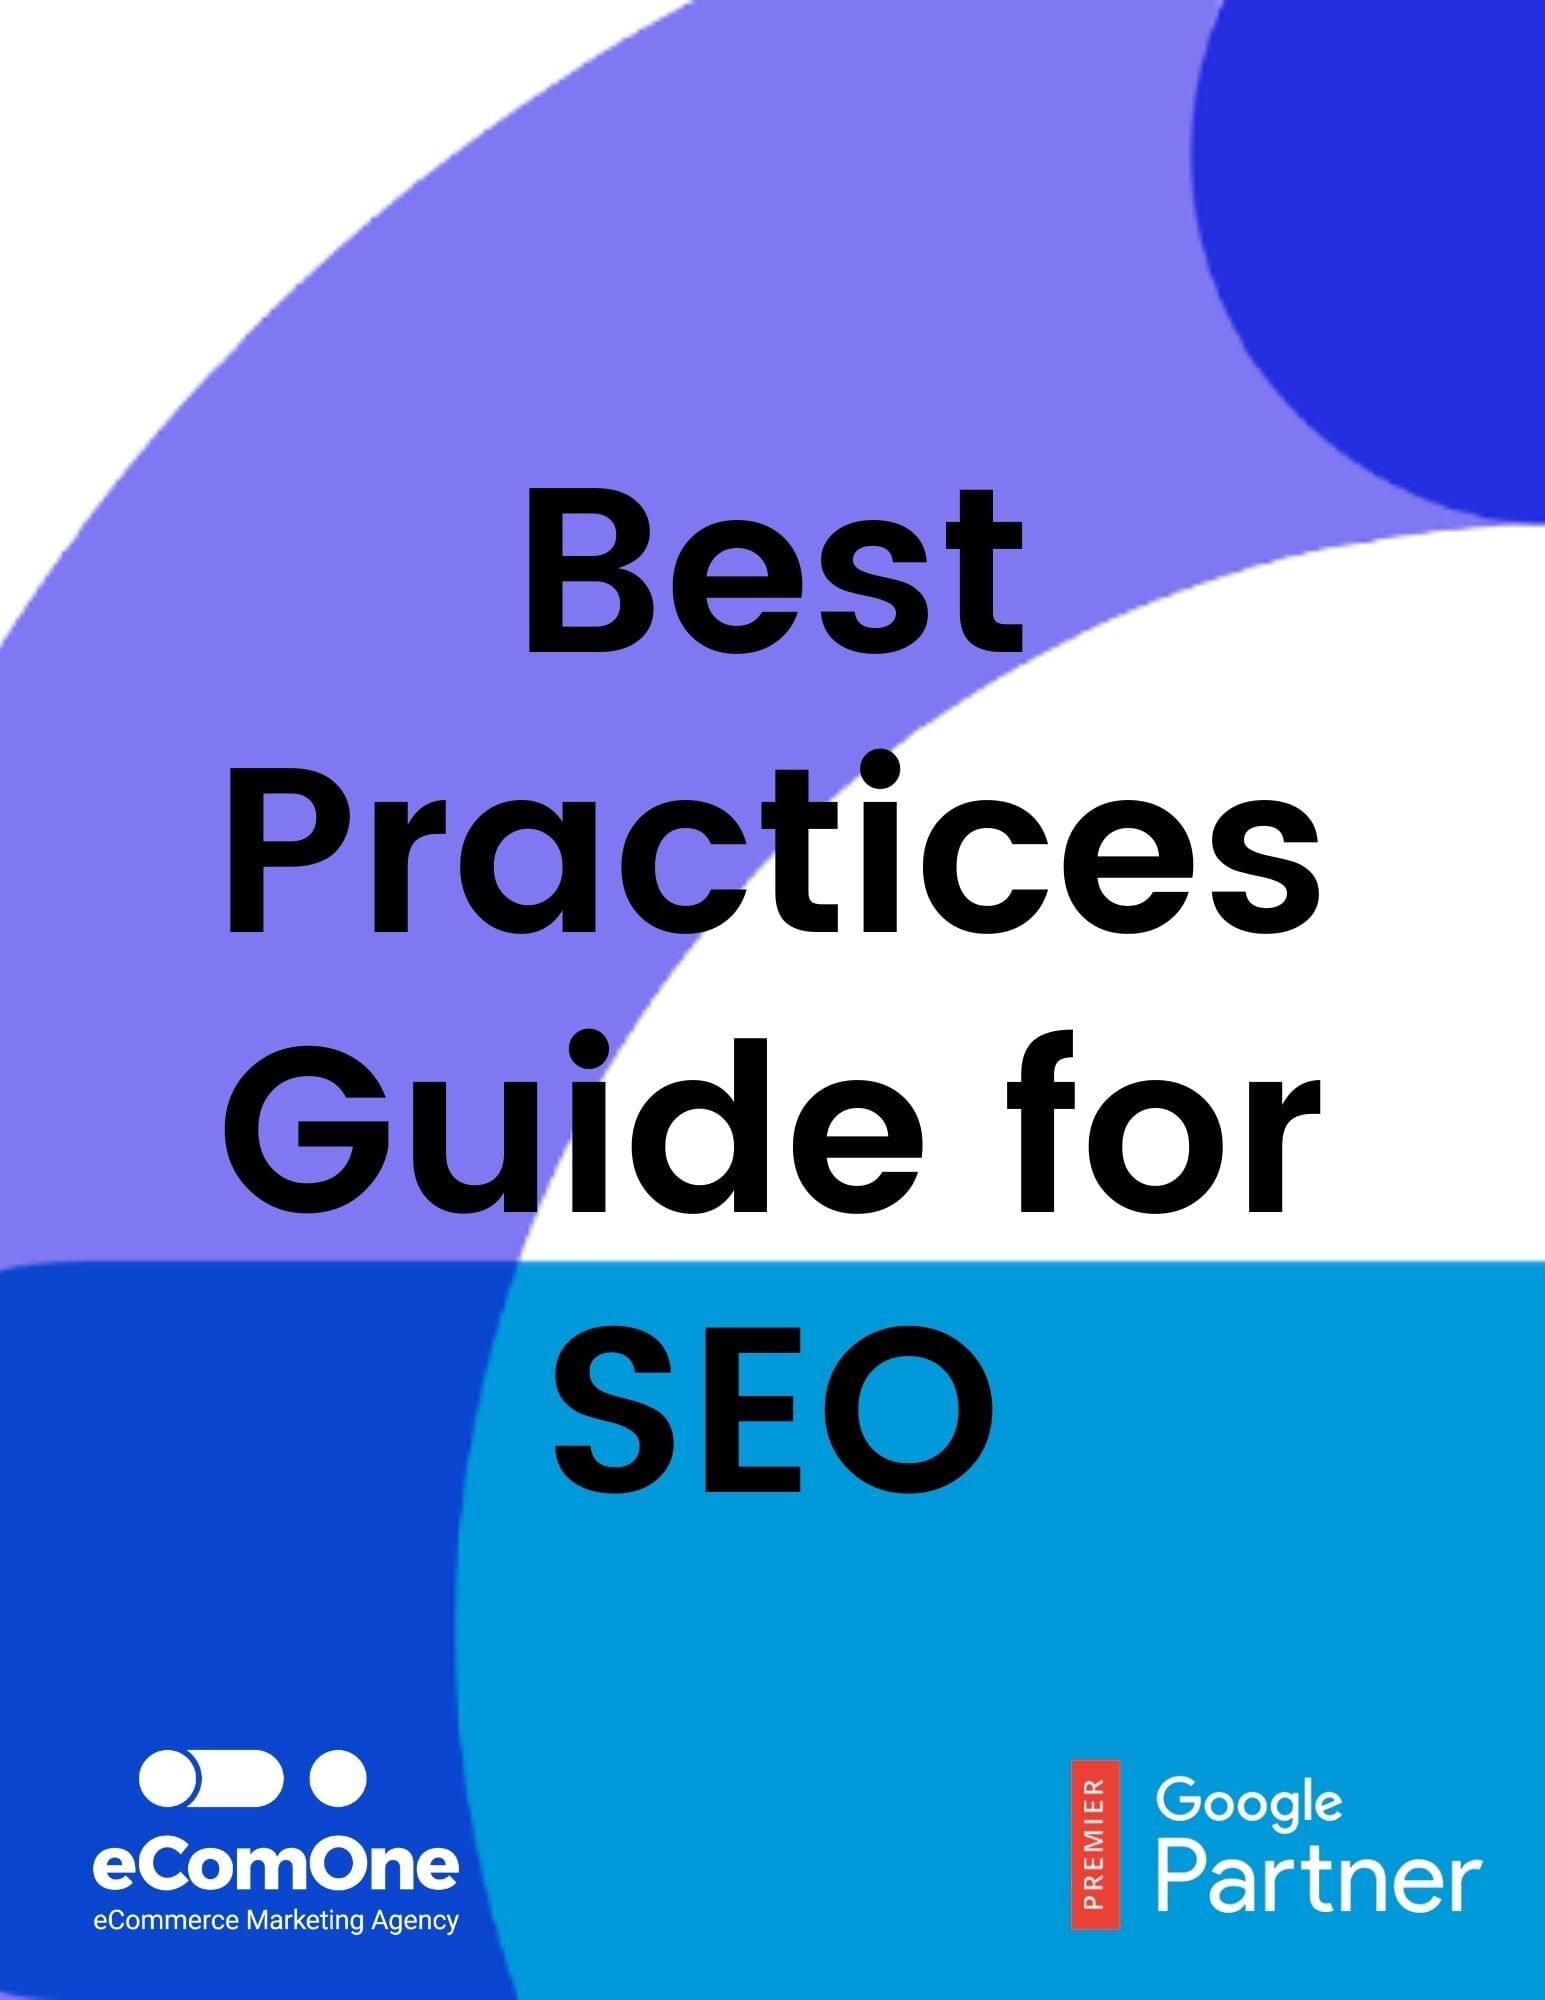 Best Practices Guide for SEO